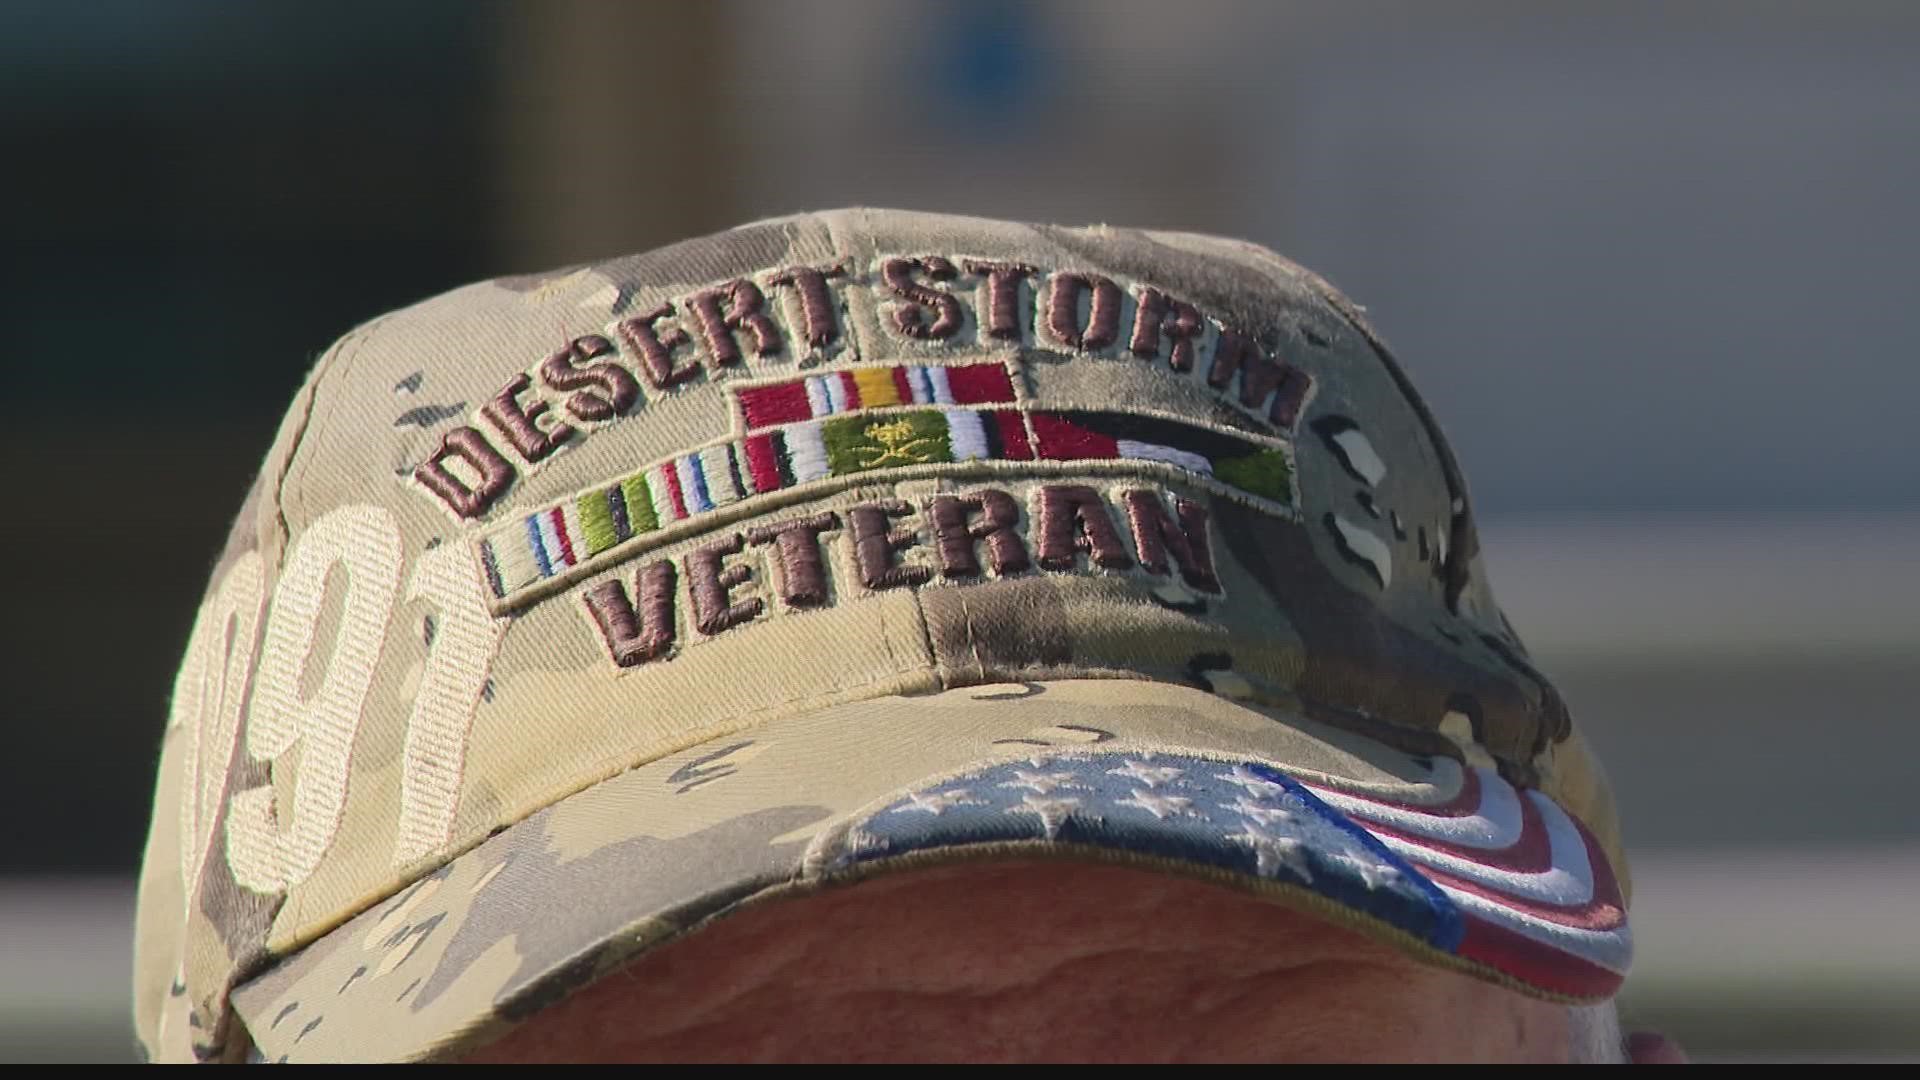 Indianapolis will soon be home to two more monuments honoring the military and veterans.